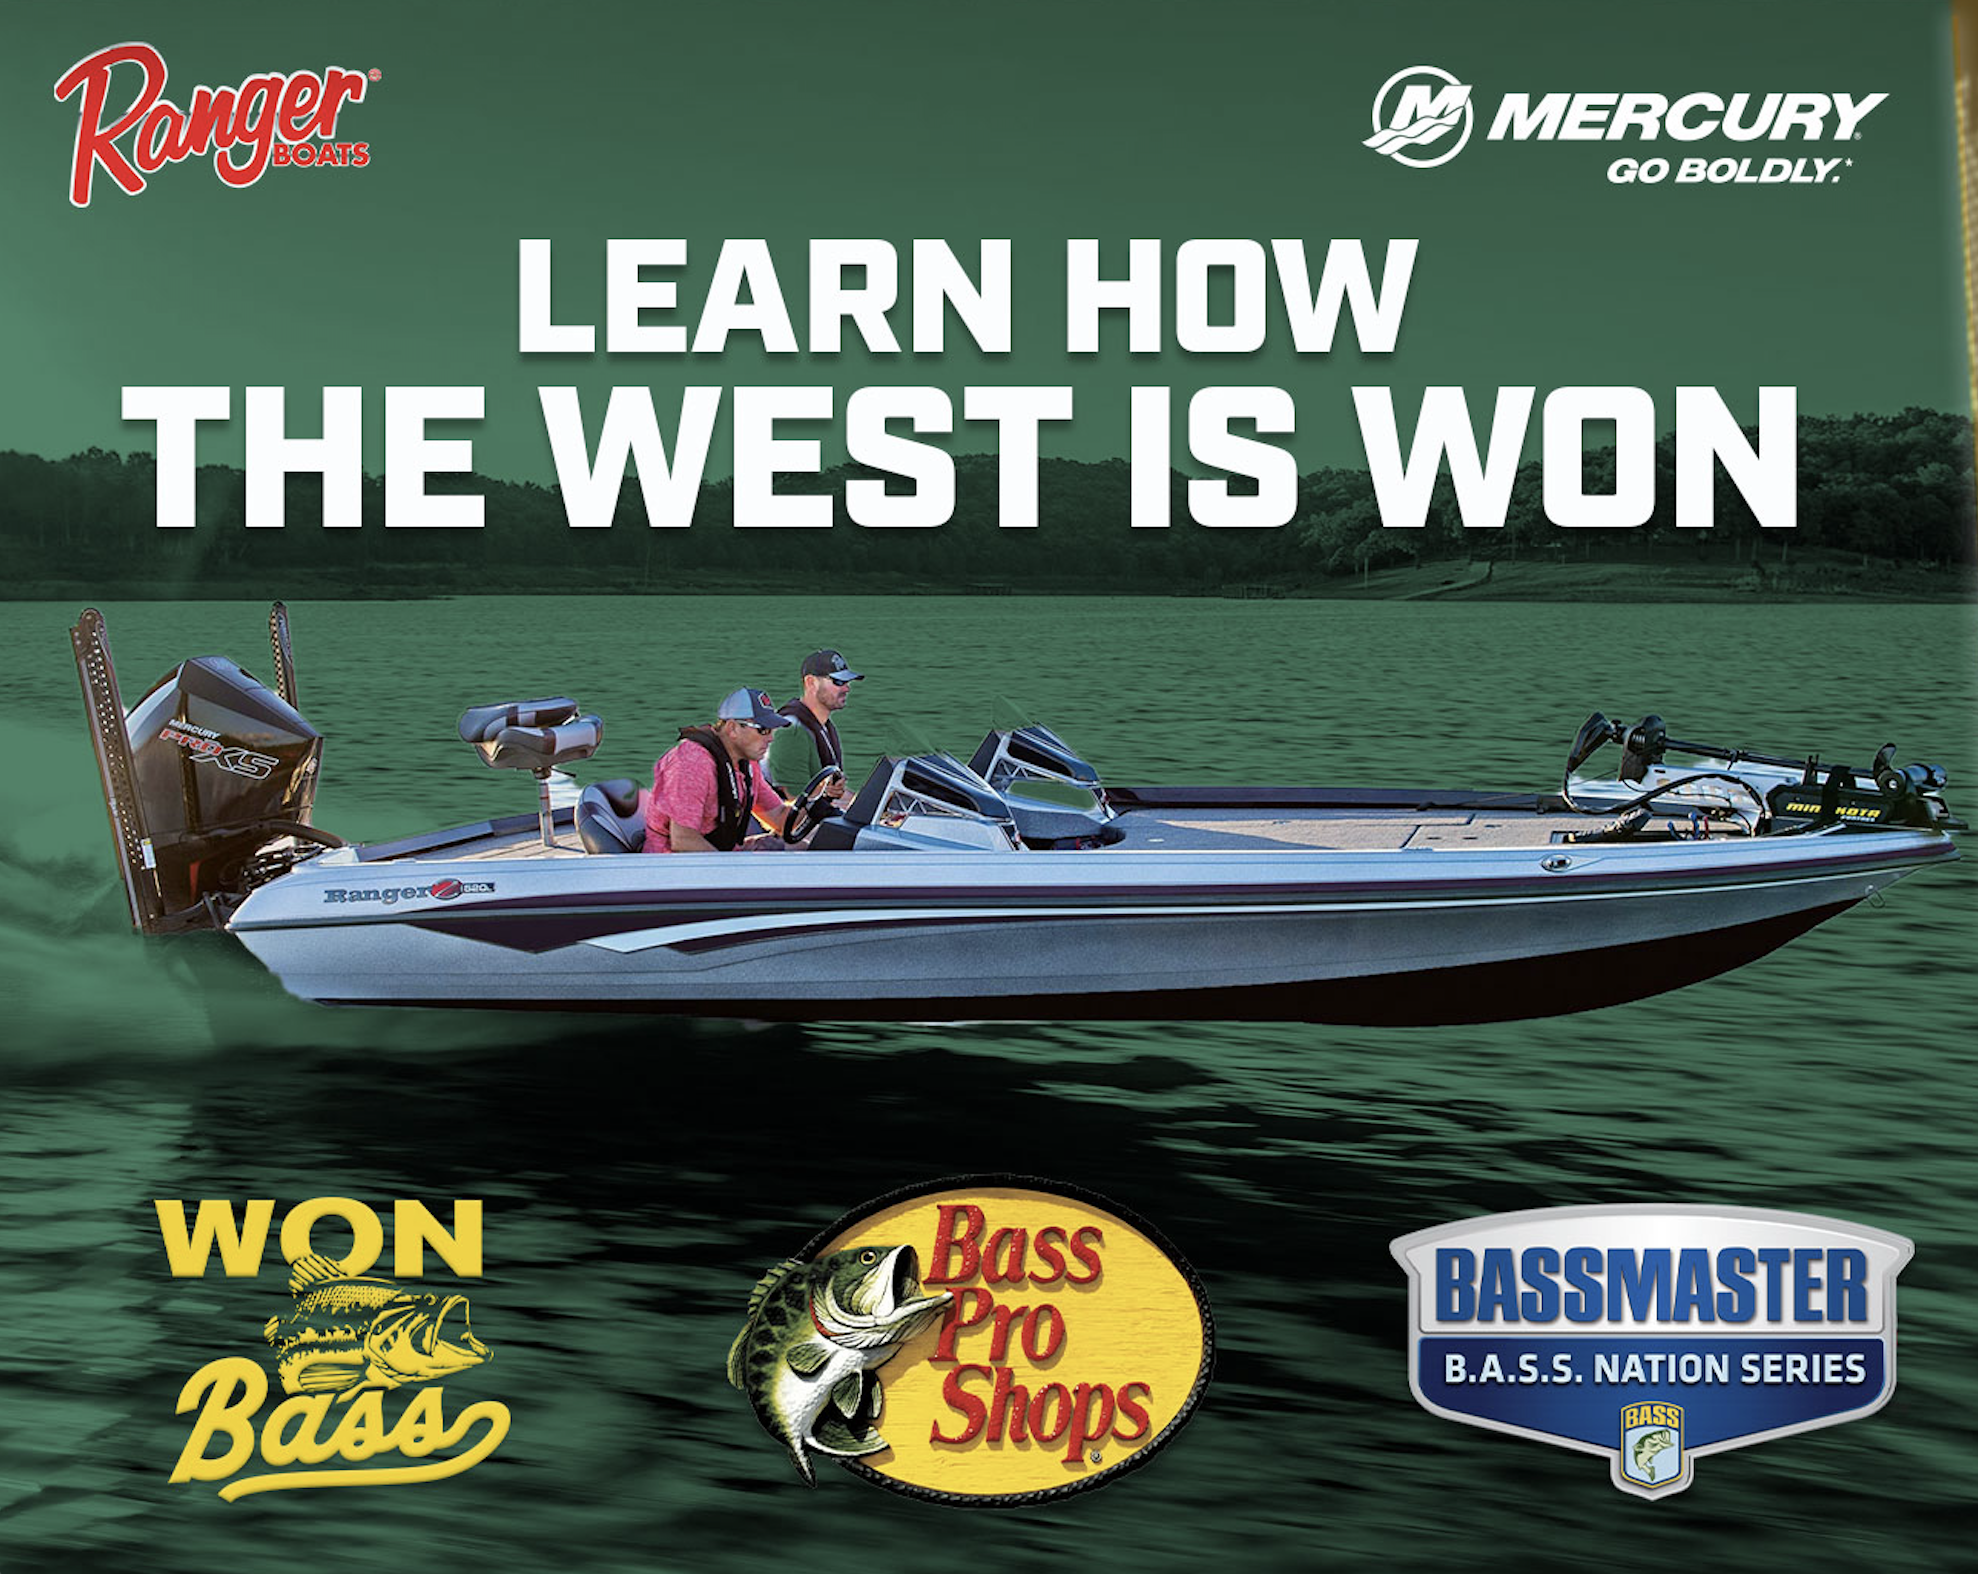 Bass Pro Shops - Worldwide Sportsman fishing shirts were designed with the  worldwide angler in mind!